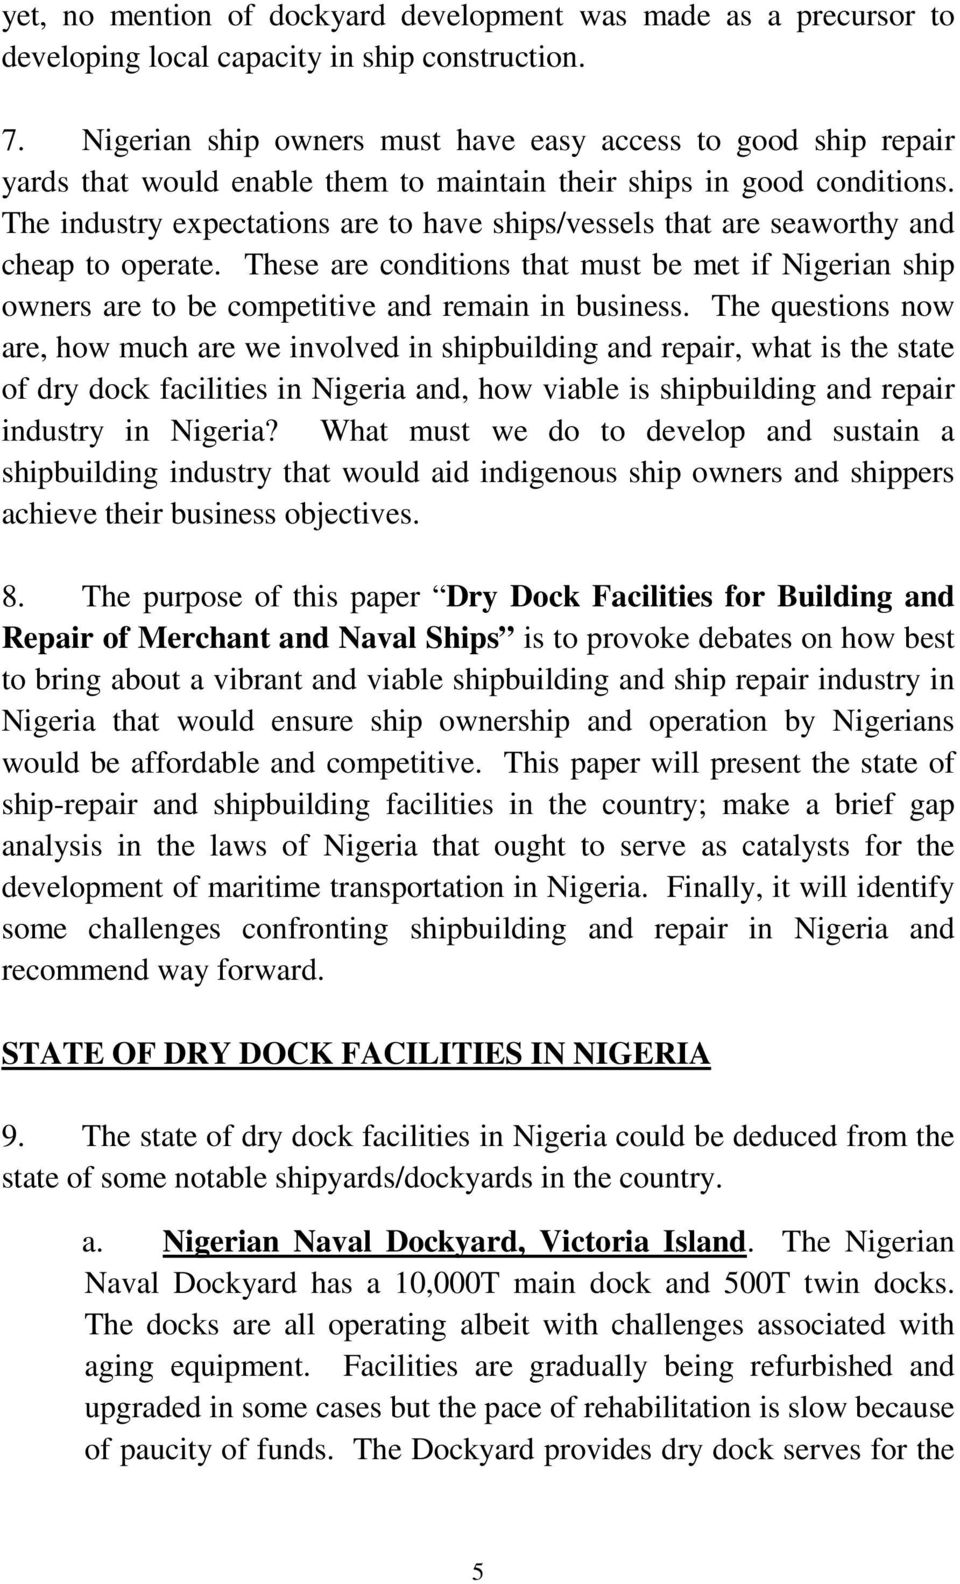 The industry expectations are to have ships/vessels that are seaworthy and cheap to operate. These are conditions that must be met if Nigerian ship owners are to be competitive and remain in business.